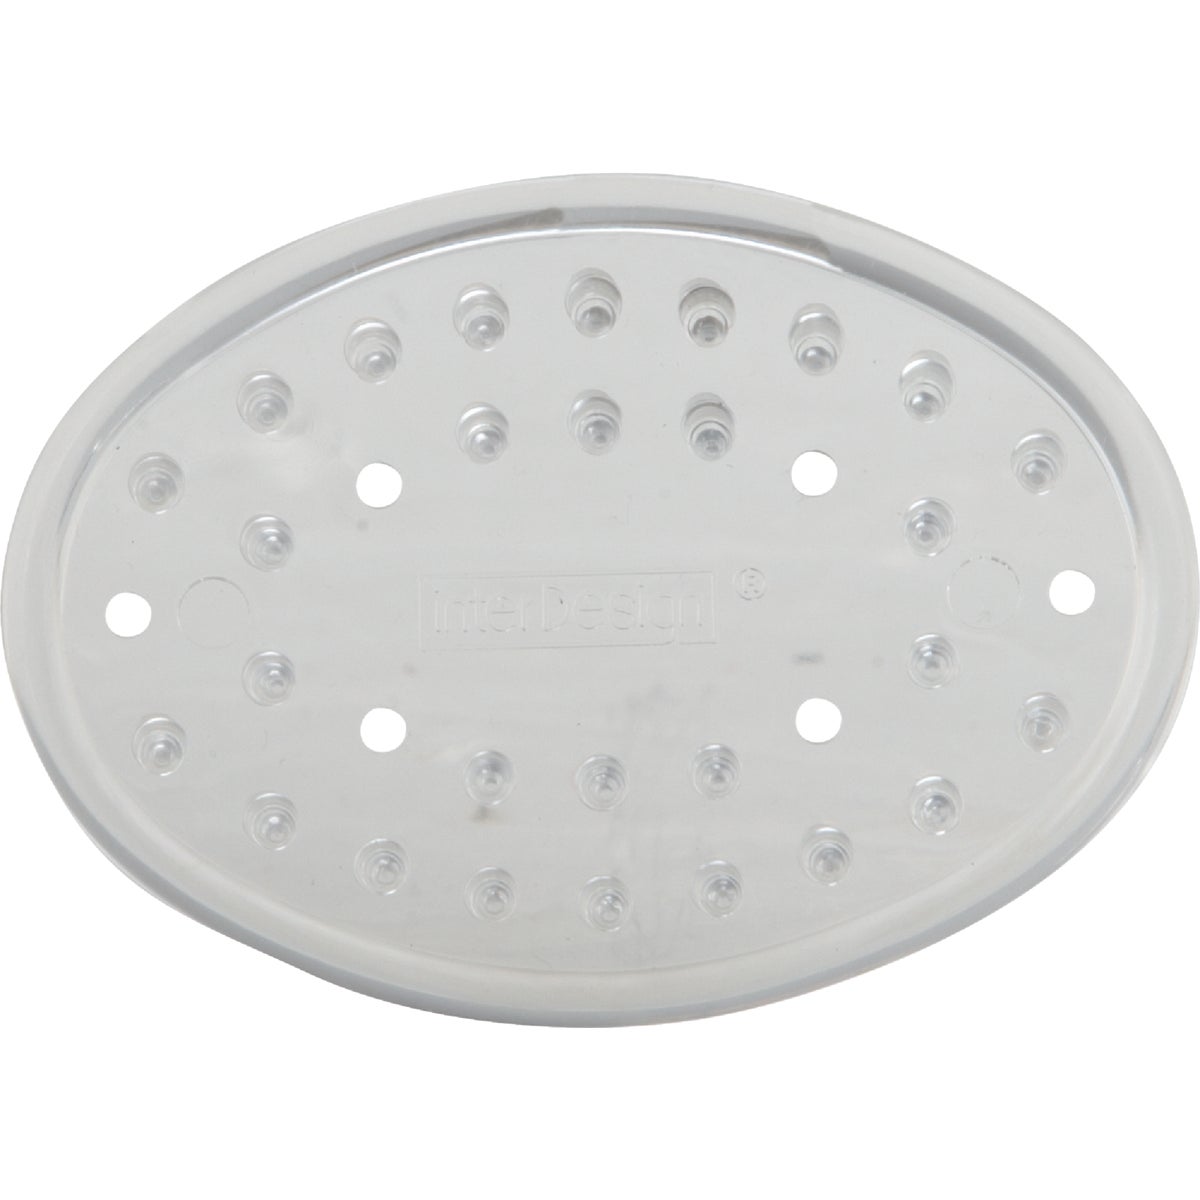 Item 602116, InterDesigns Soap Dish doesn't occupy much counter space due to its small 